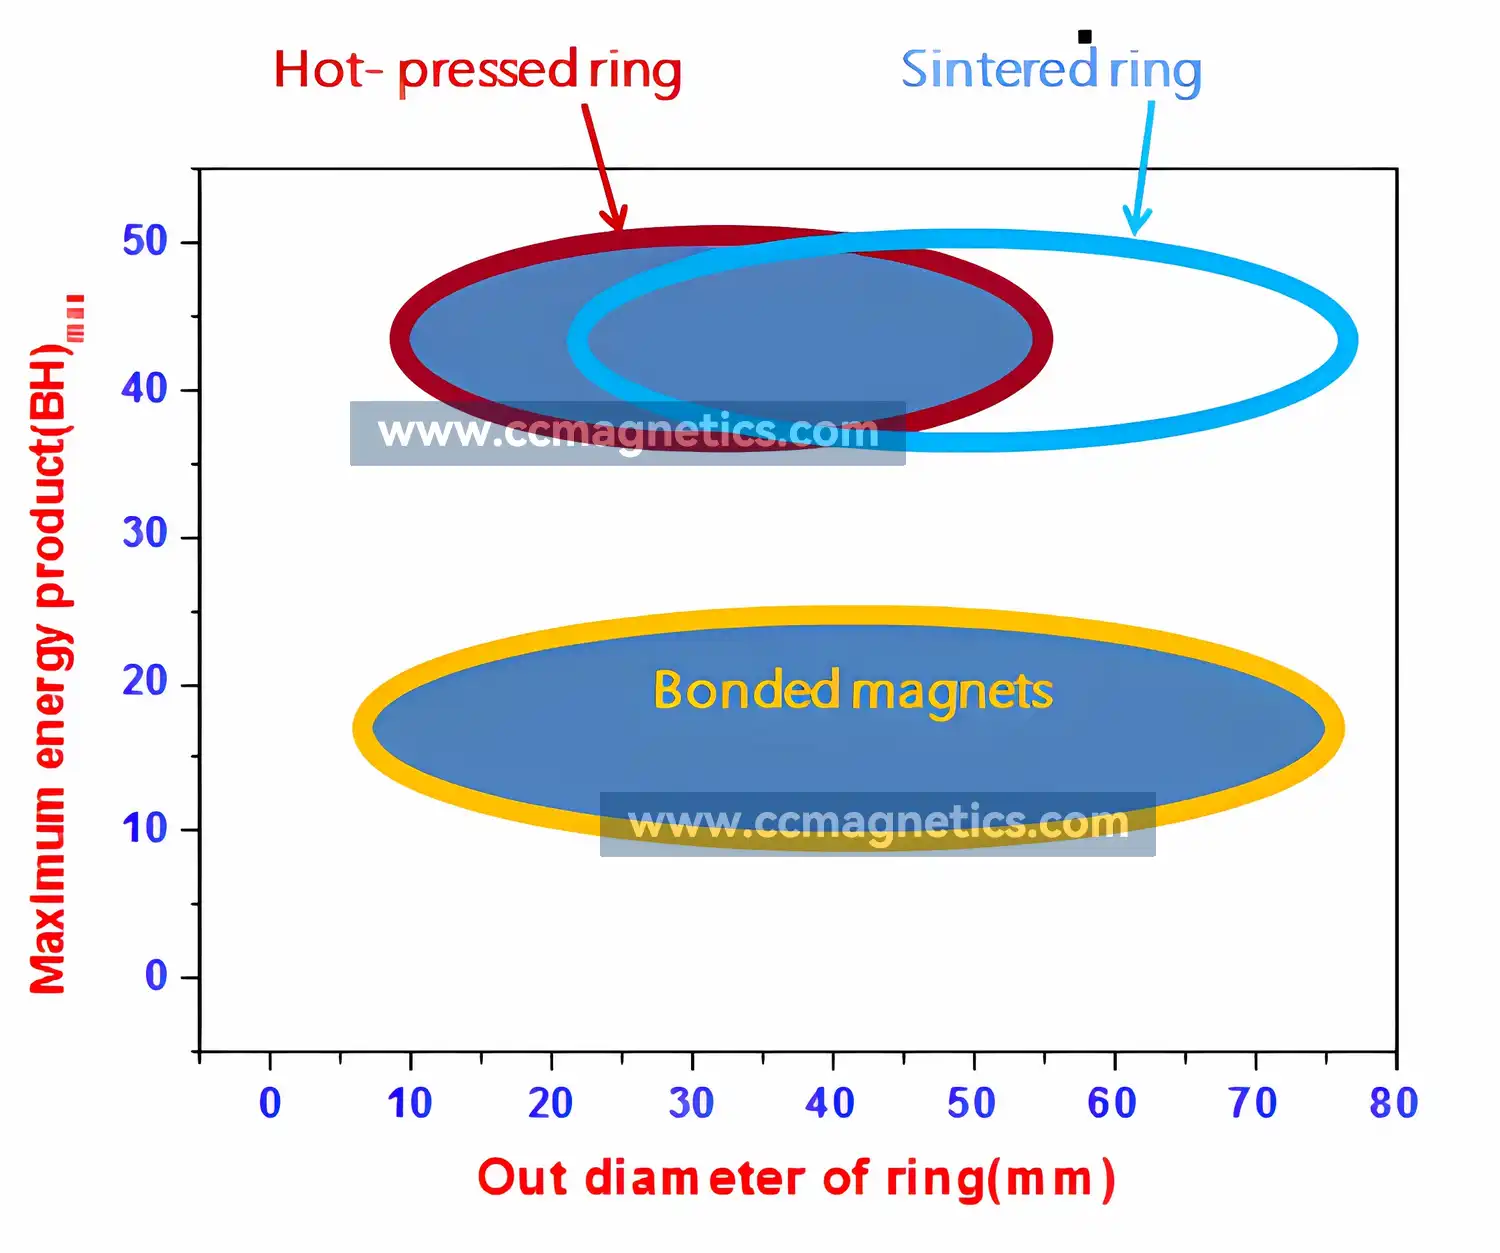 Hot Press techniques can be used to produce high-performance rings with small diameters